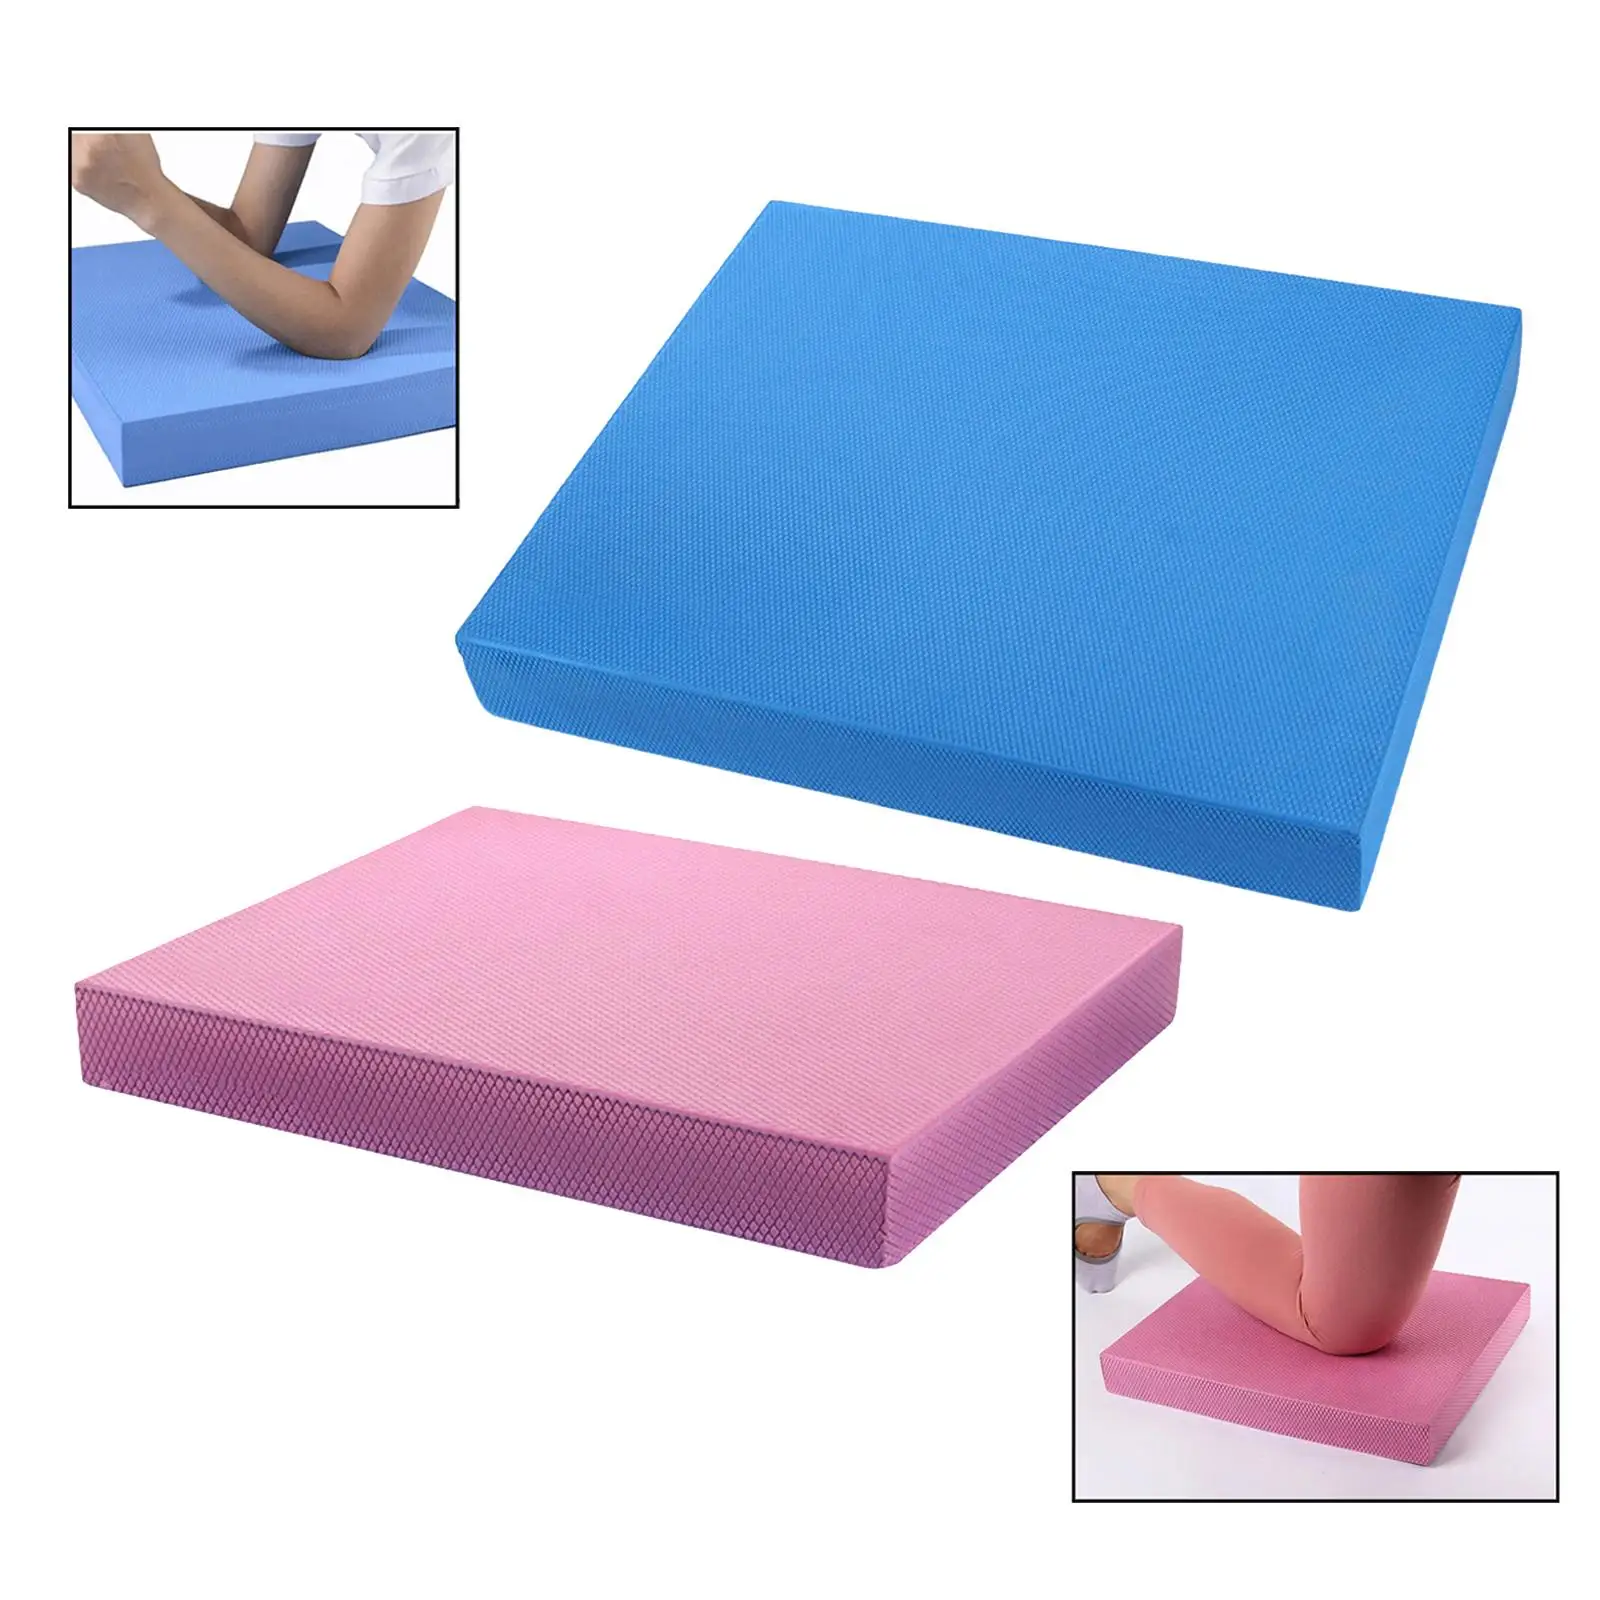  Yoga Mat Trainer for , Knee and Ankle Exercise, Strength Training, Cushion for Adults, Kids